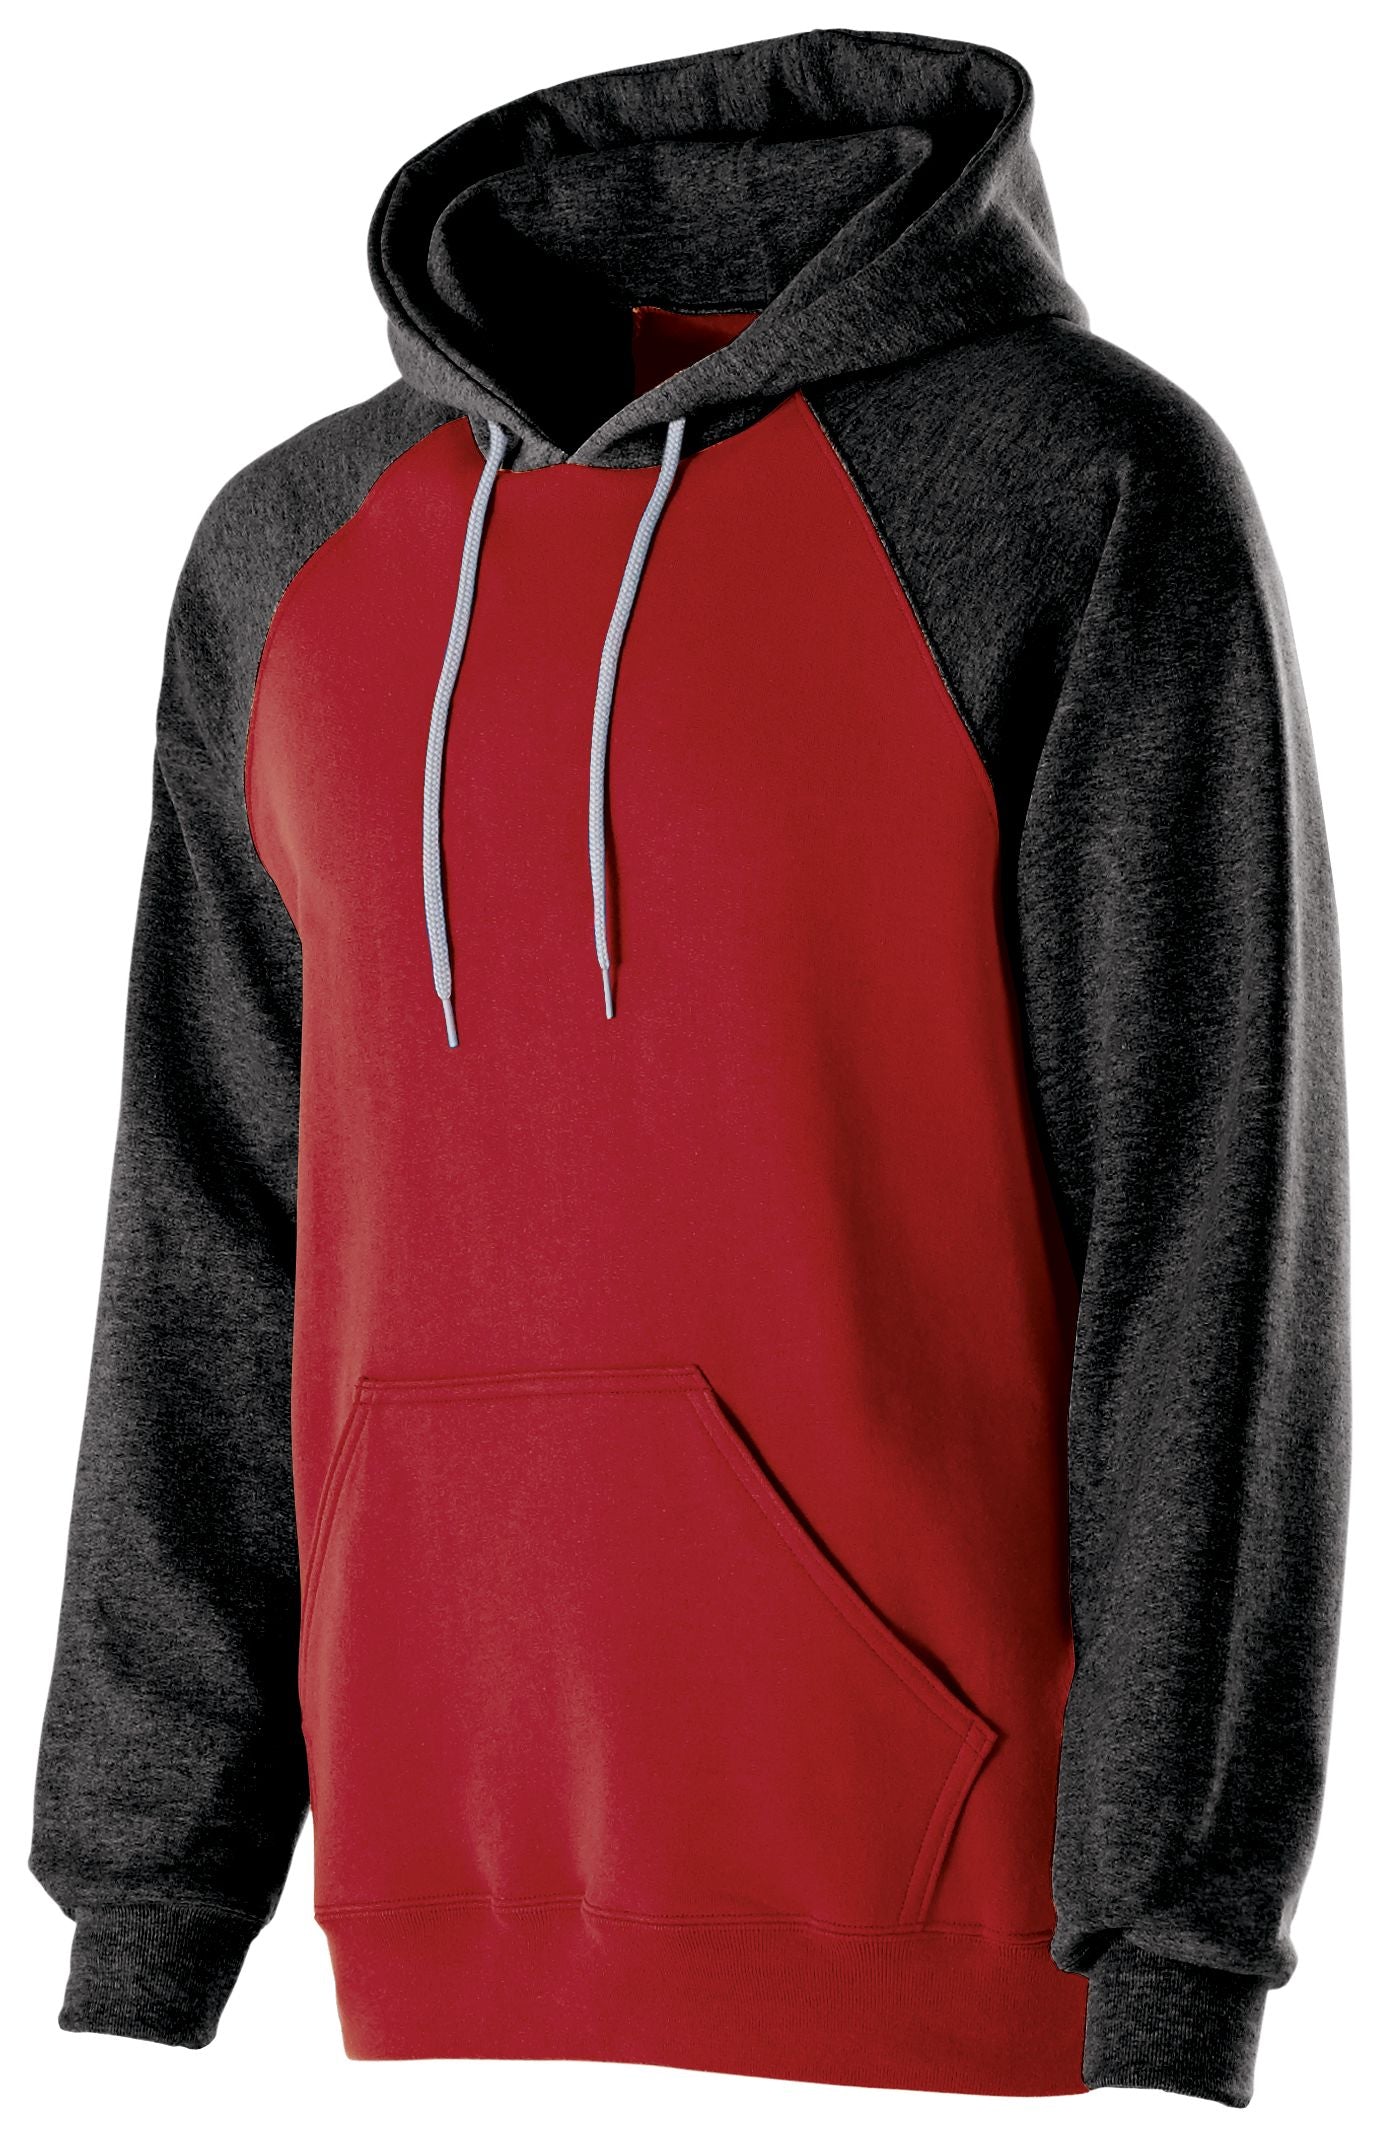 Holloway Banner Hoodie in Red/Black  -Part of the Adult, Adult-Hoodie, Hoodies, Holloway product lines at KanaleyCreations.com